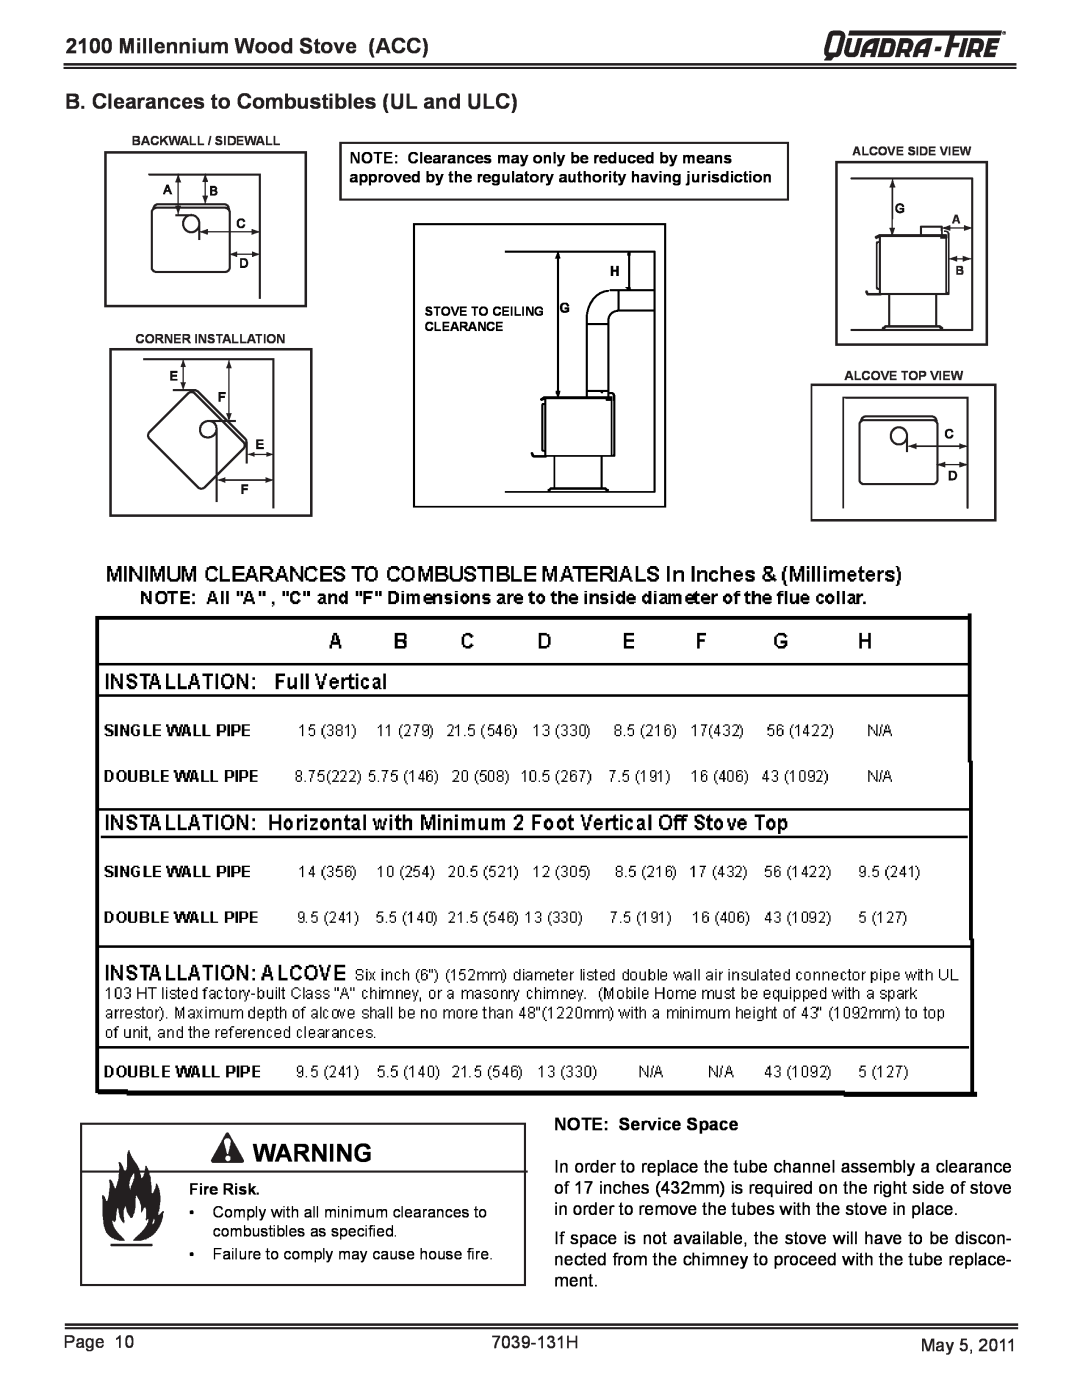 Quadra-Fire 21M-ACC owner manual Millennium Wood Stove ACC, B. Clearances to Combustibles UL and ULC, NOTE Service Space 